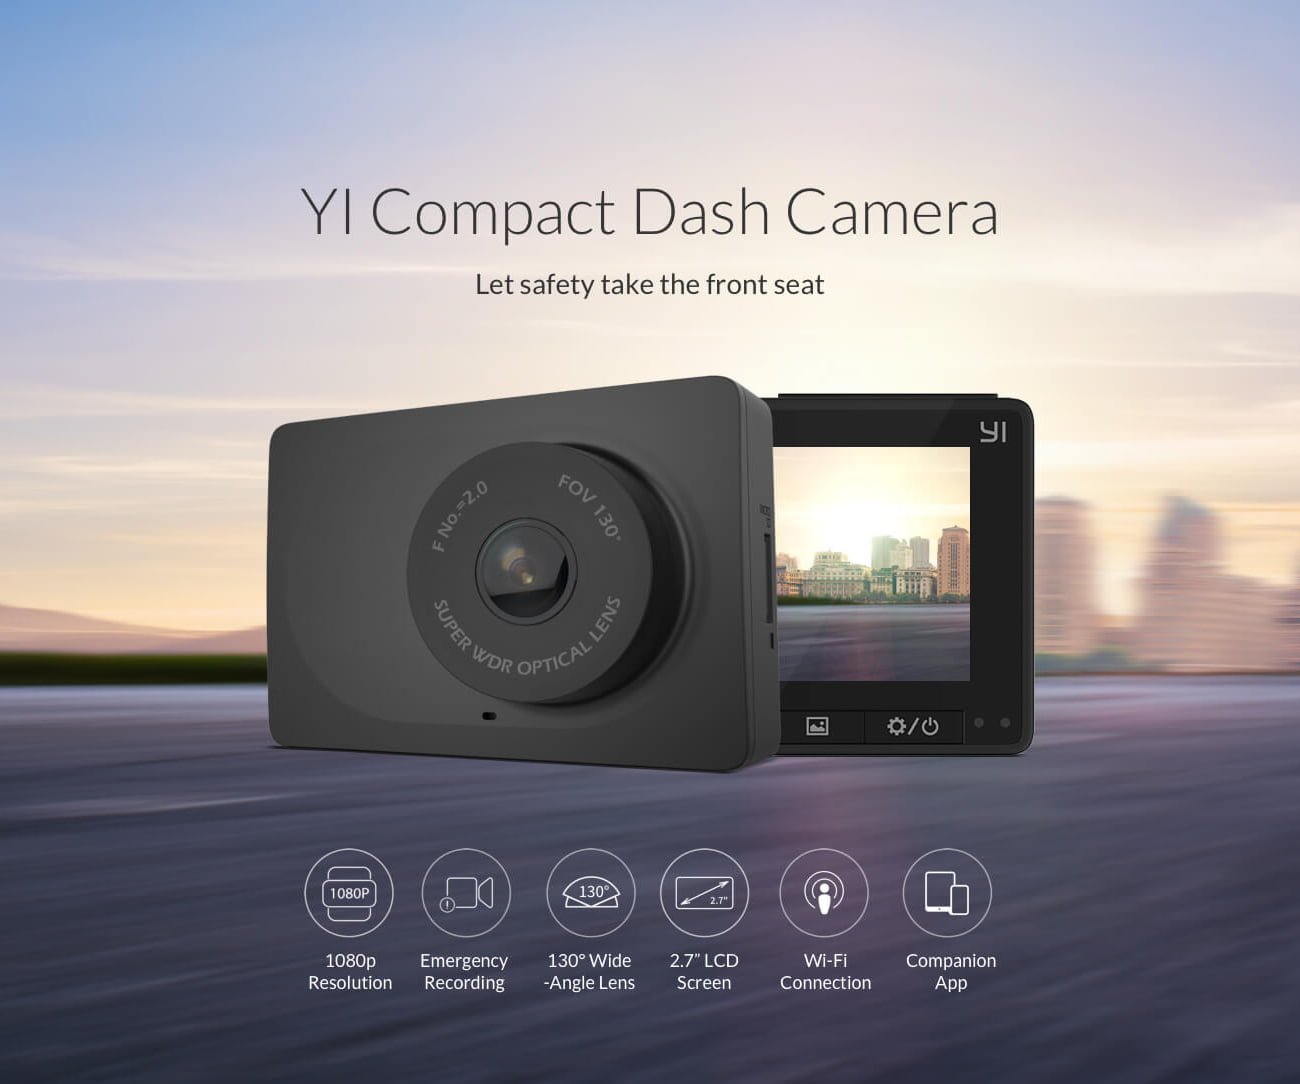 YI Compact Dash Camera Let safety take the front seat